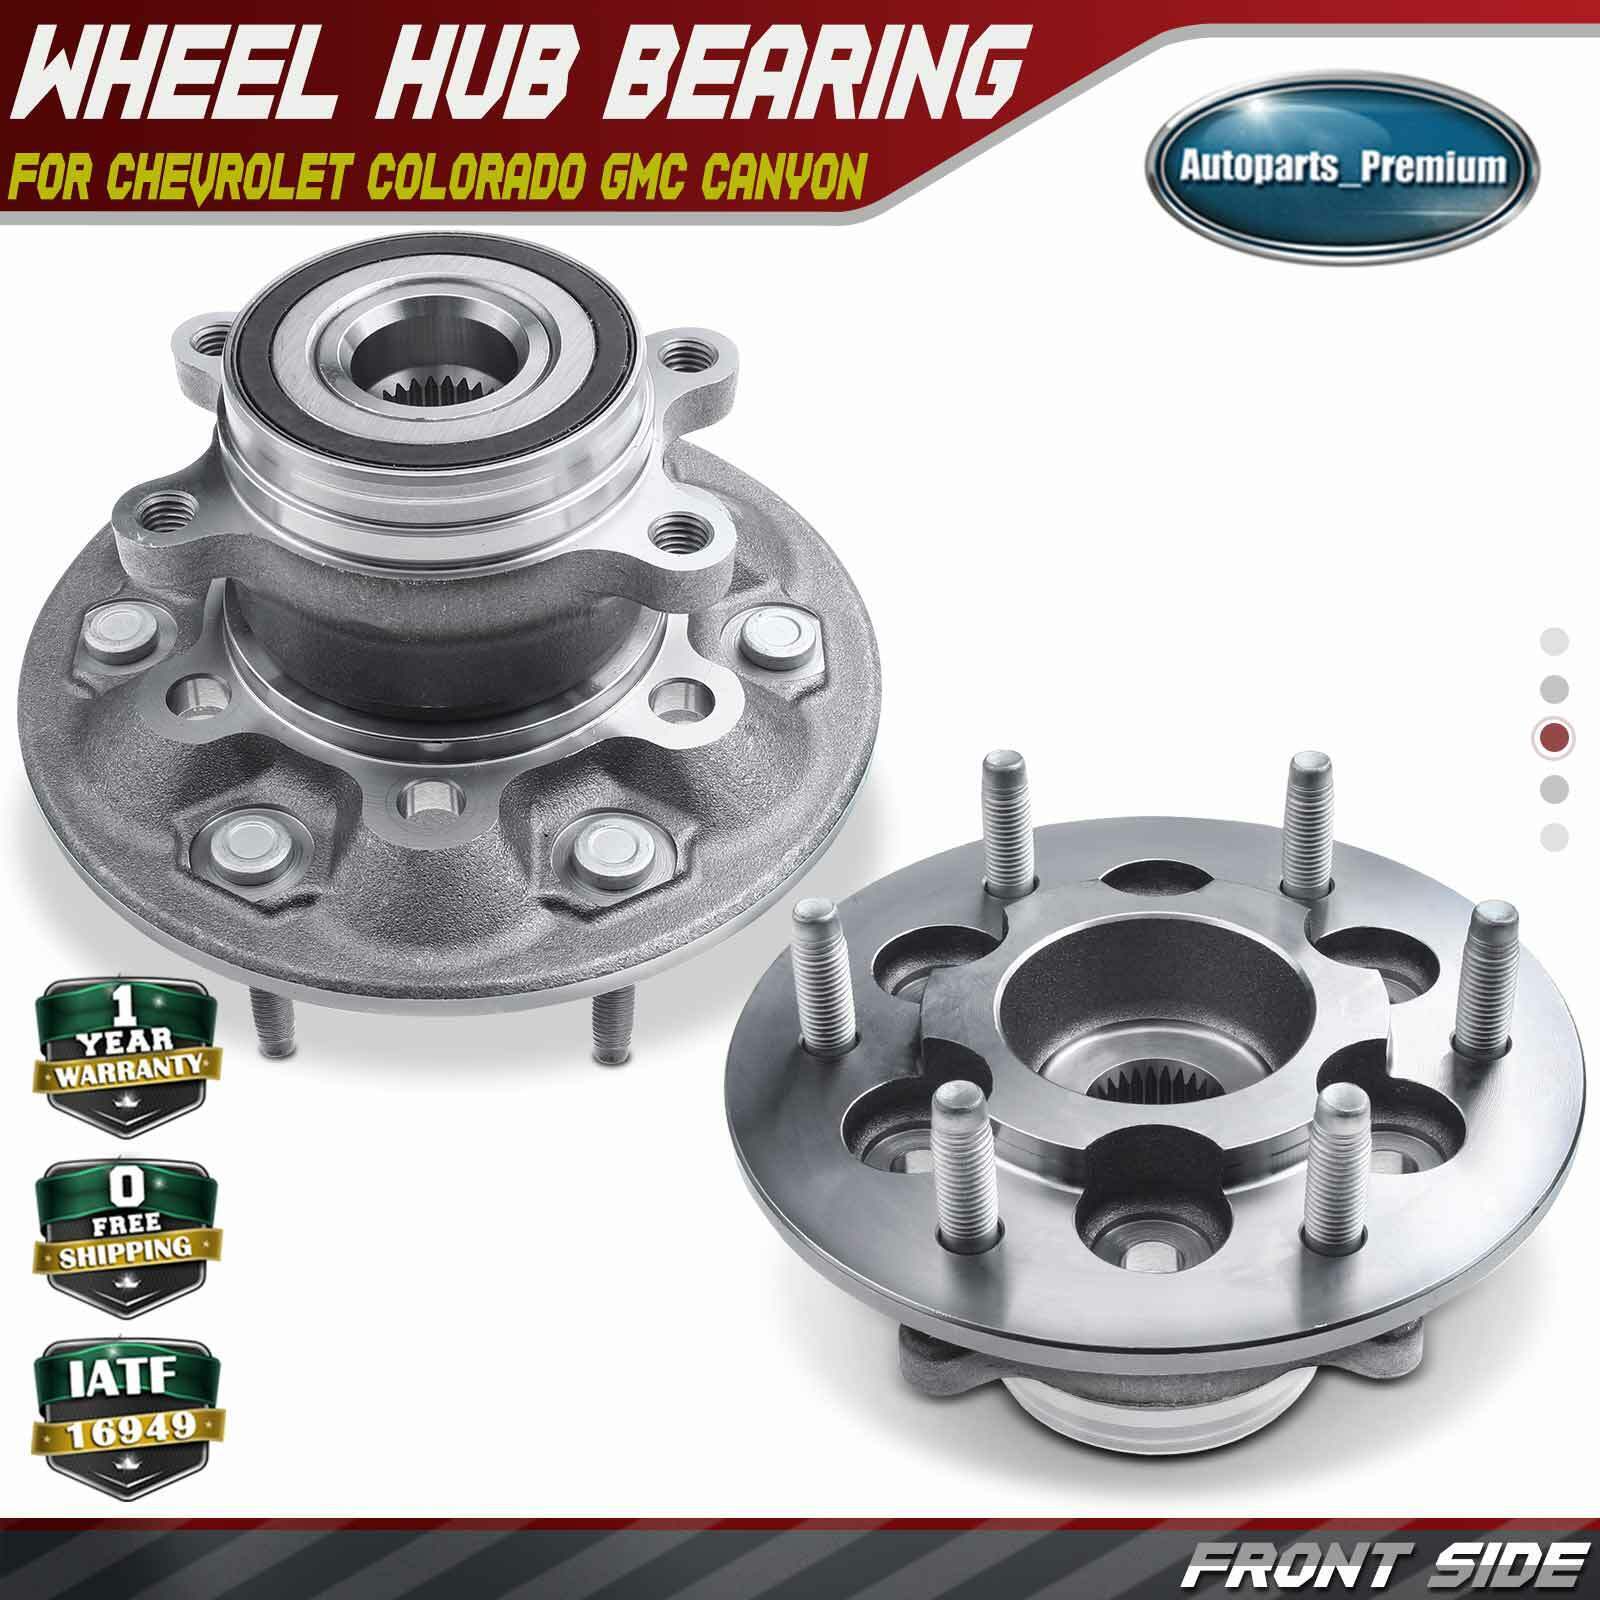 2x Front LH & RH Wheel Hub Bearing Assembly for Chevy Colorado GMC Canyon 4WD